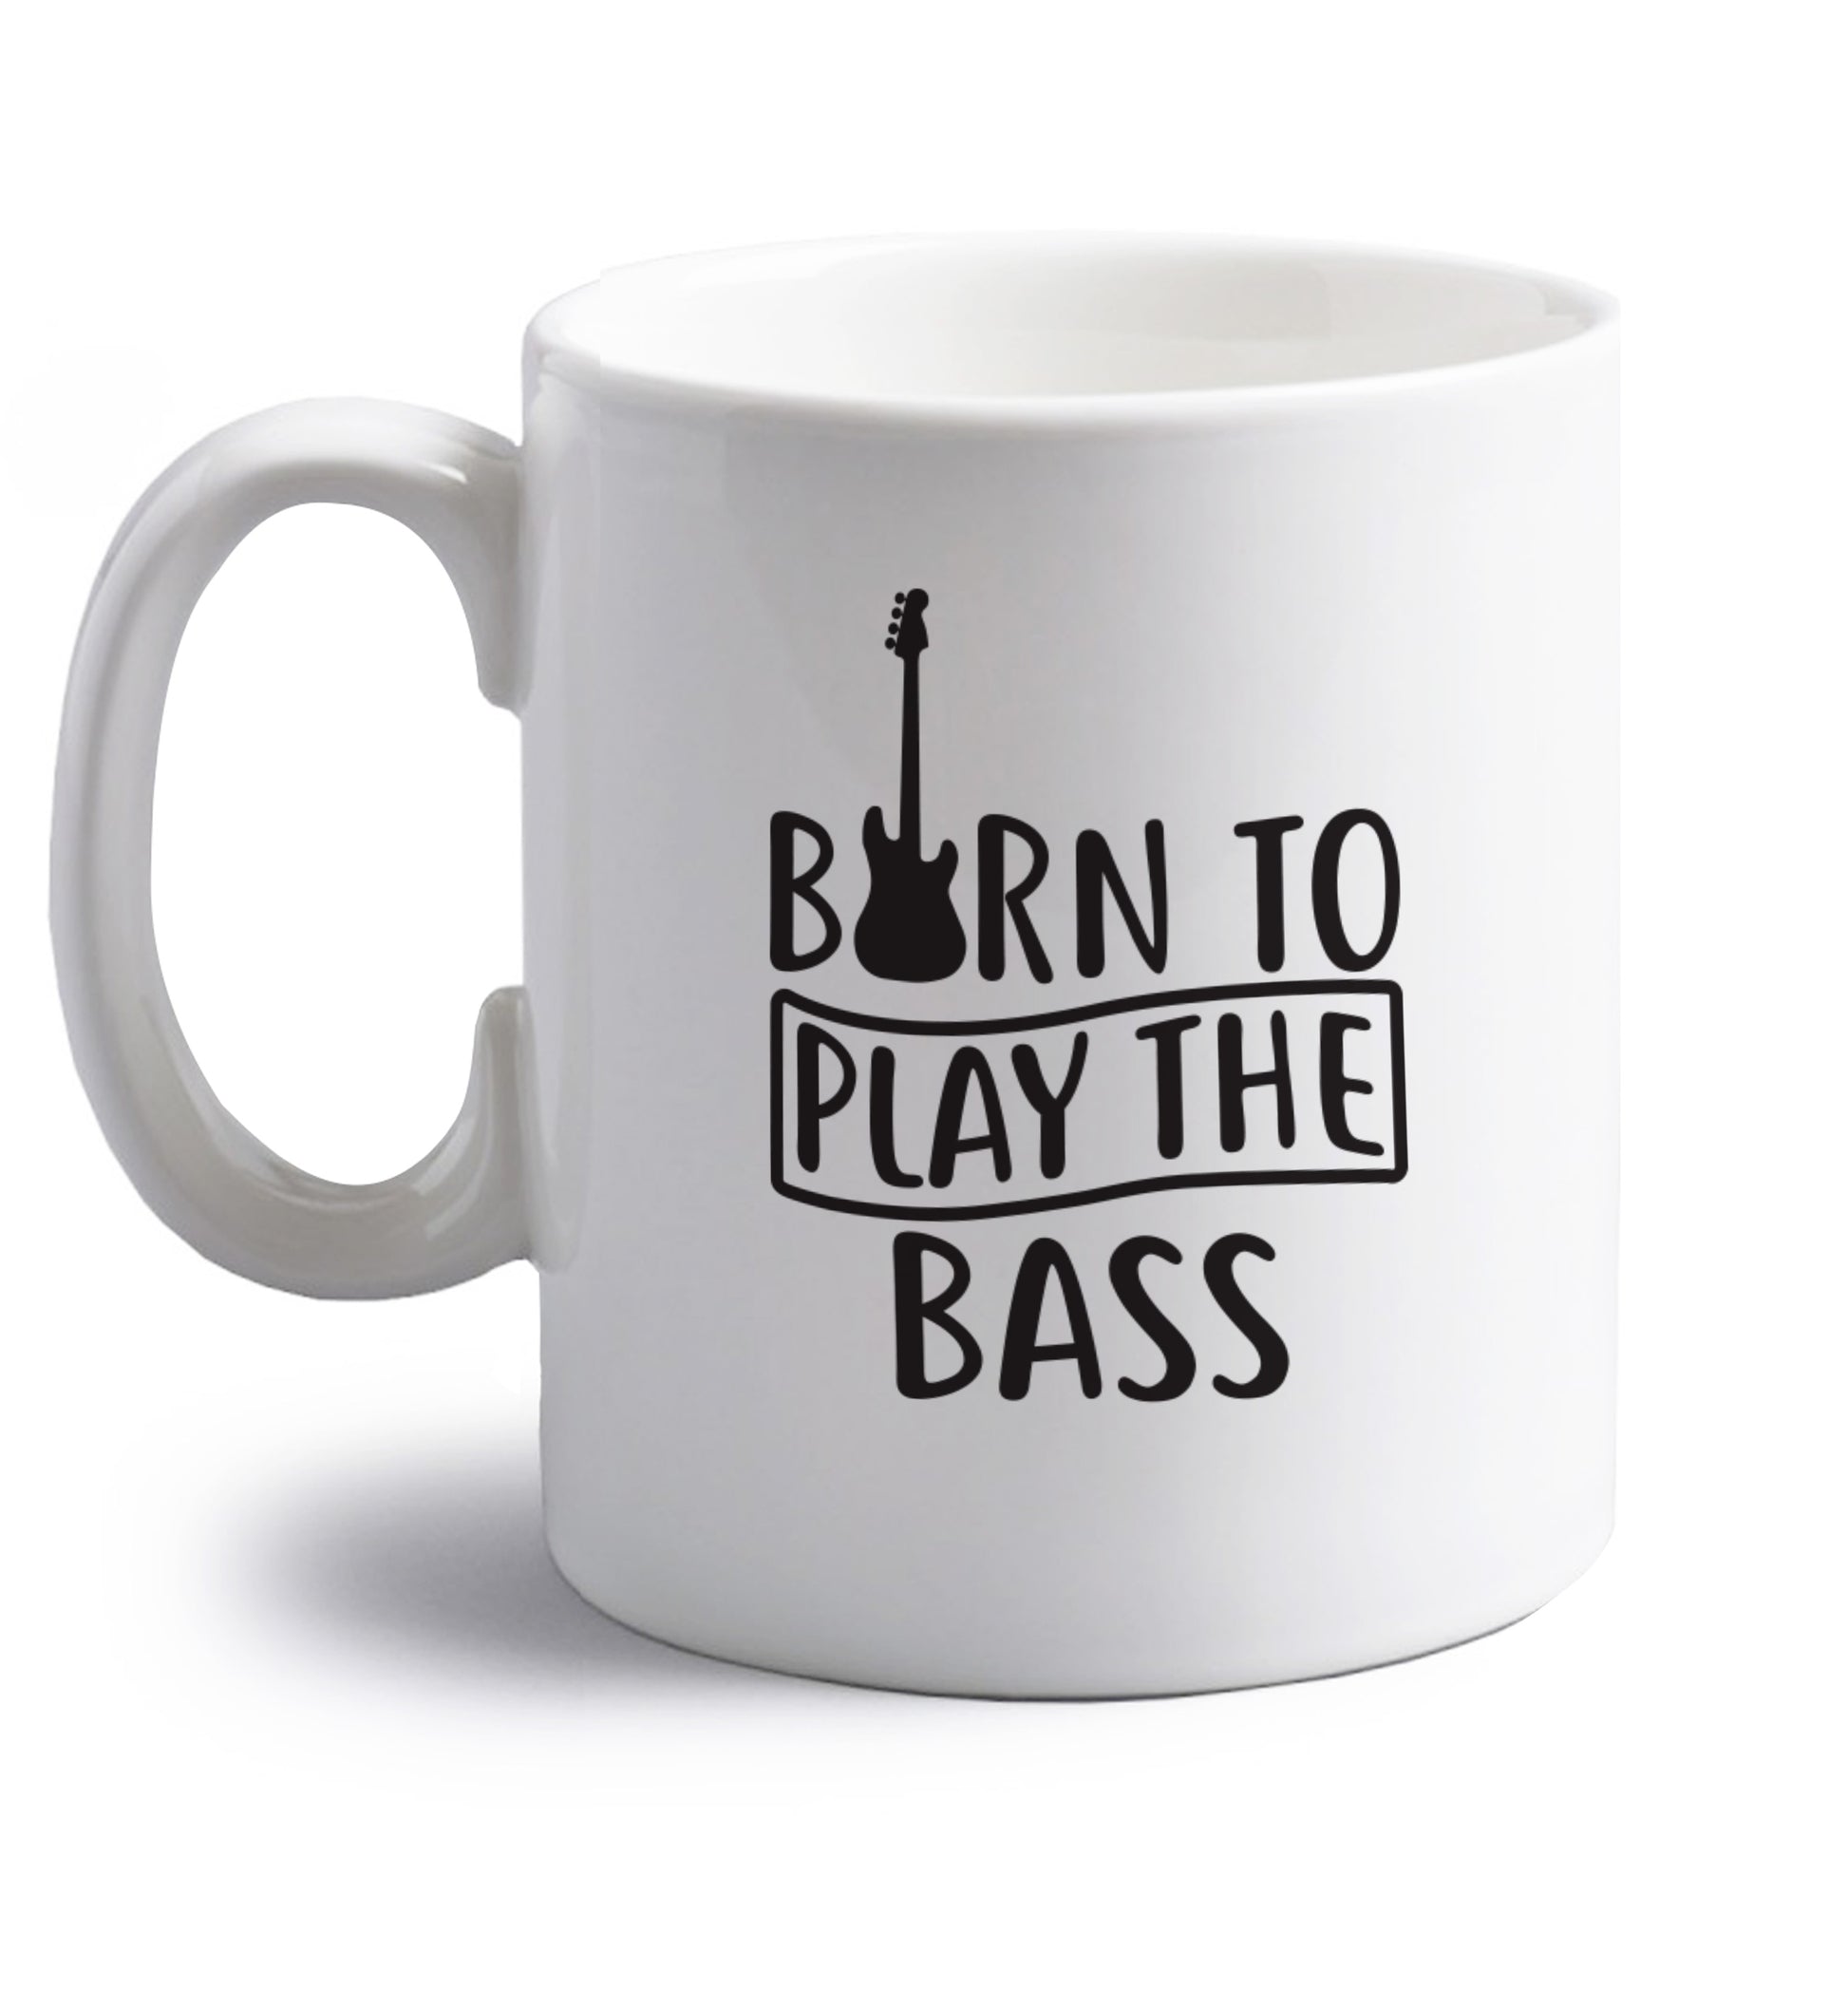 Born to play the bass right handed white ceramic mug 